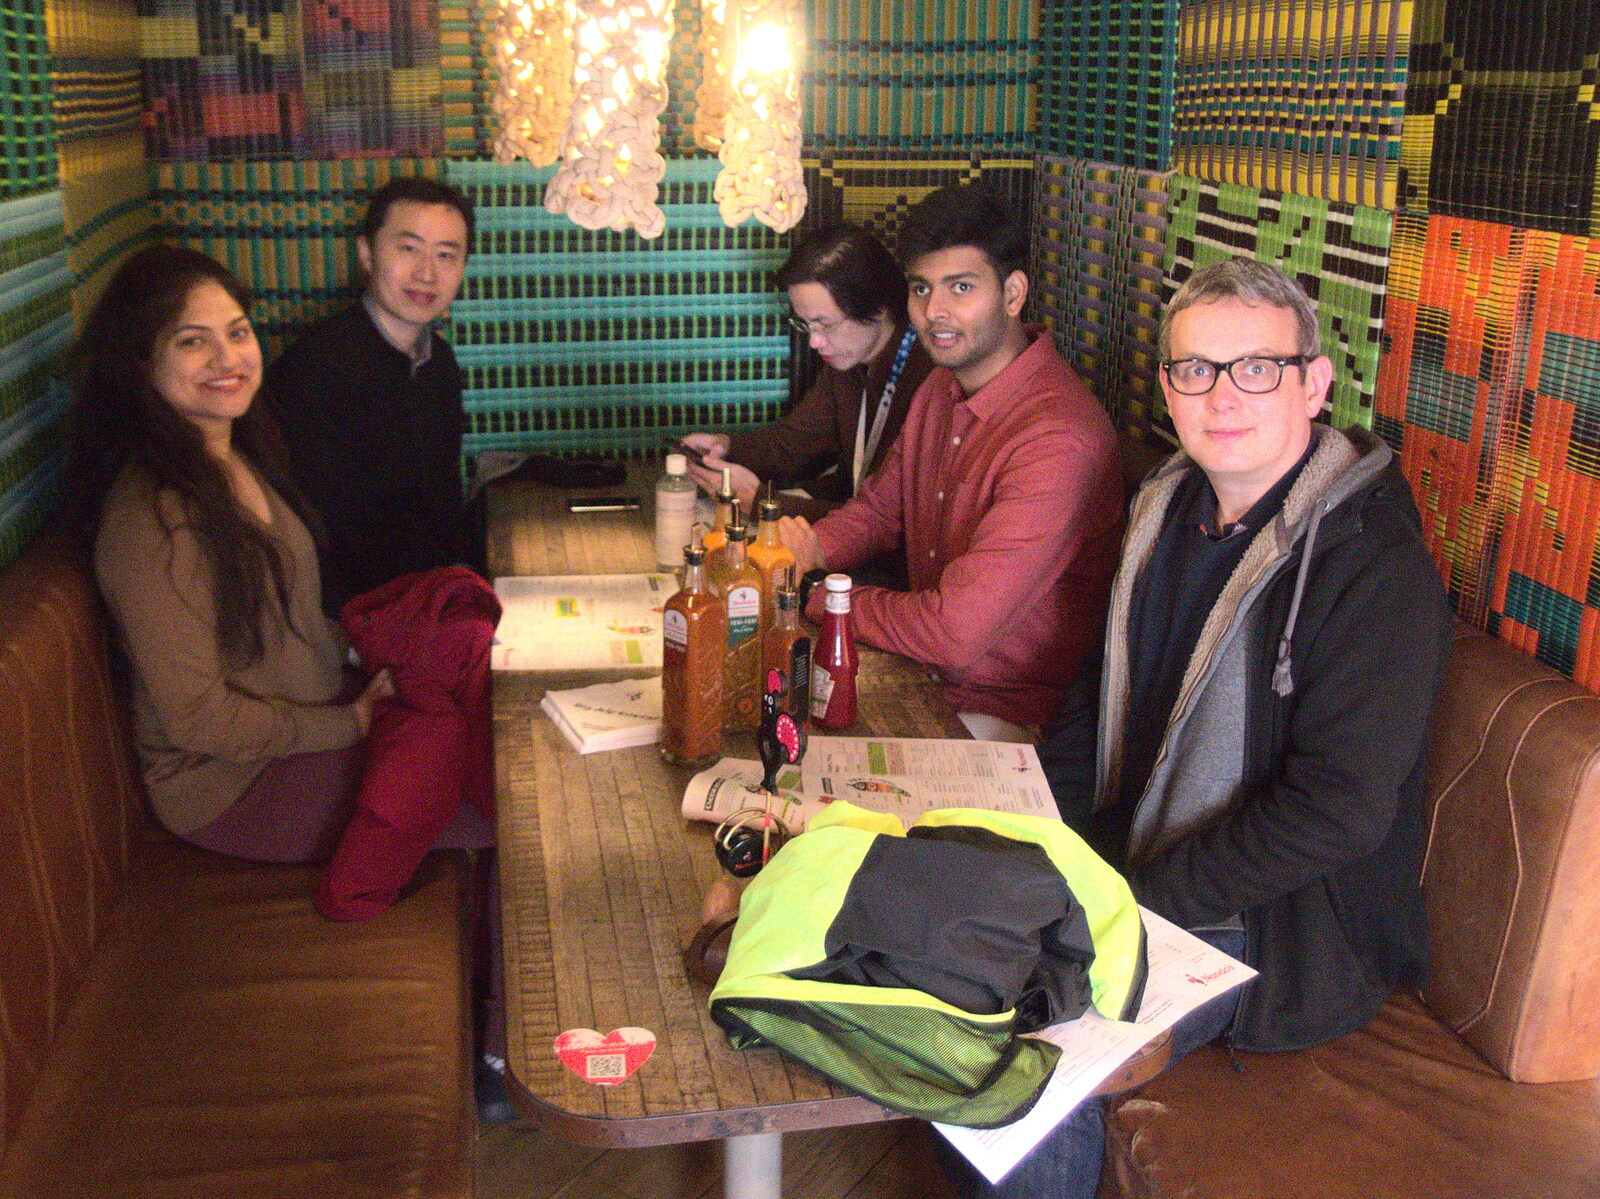 Some of the gang in Bayswater Nando's from The Last Trip to the SwiftKey Office, Paddington, London - 23rd February 2022